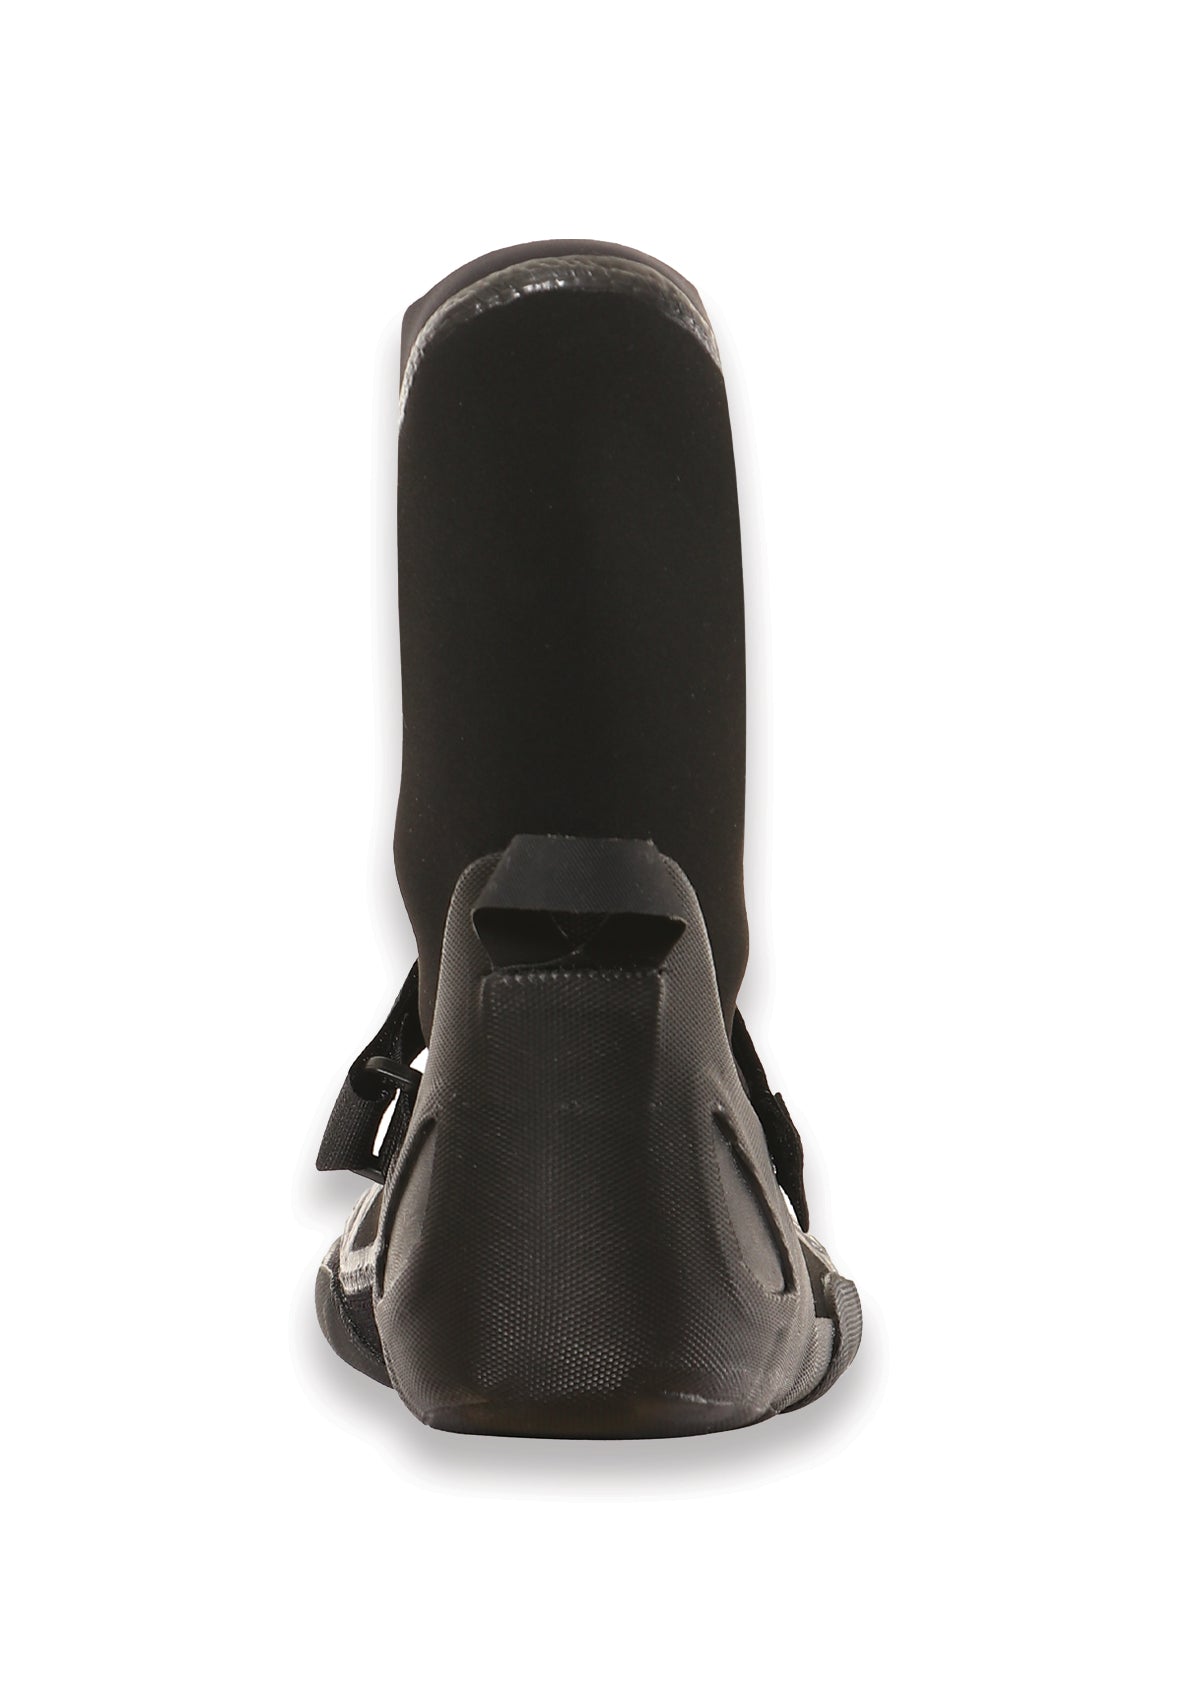 2mm Liquid Taped Thermal Wetsuit Boot